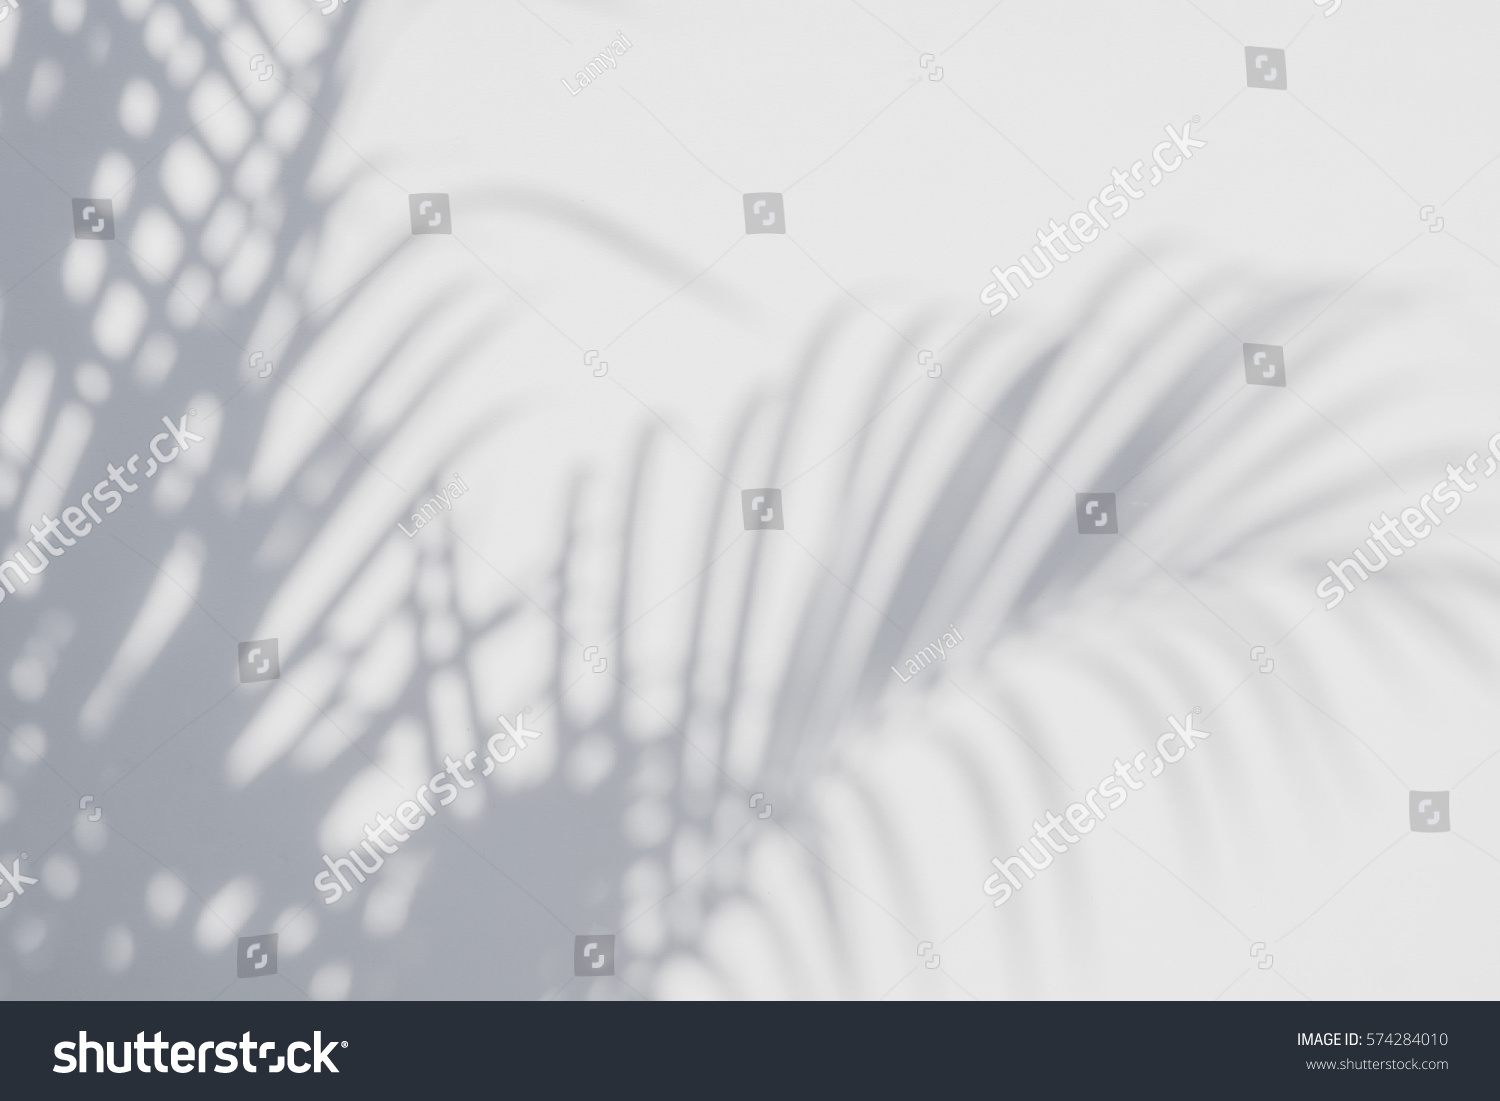 abstract background of shadows palm leaves on a white wall. White and Black #574284010